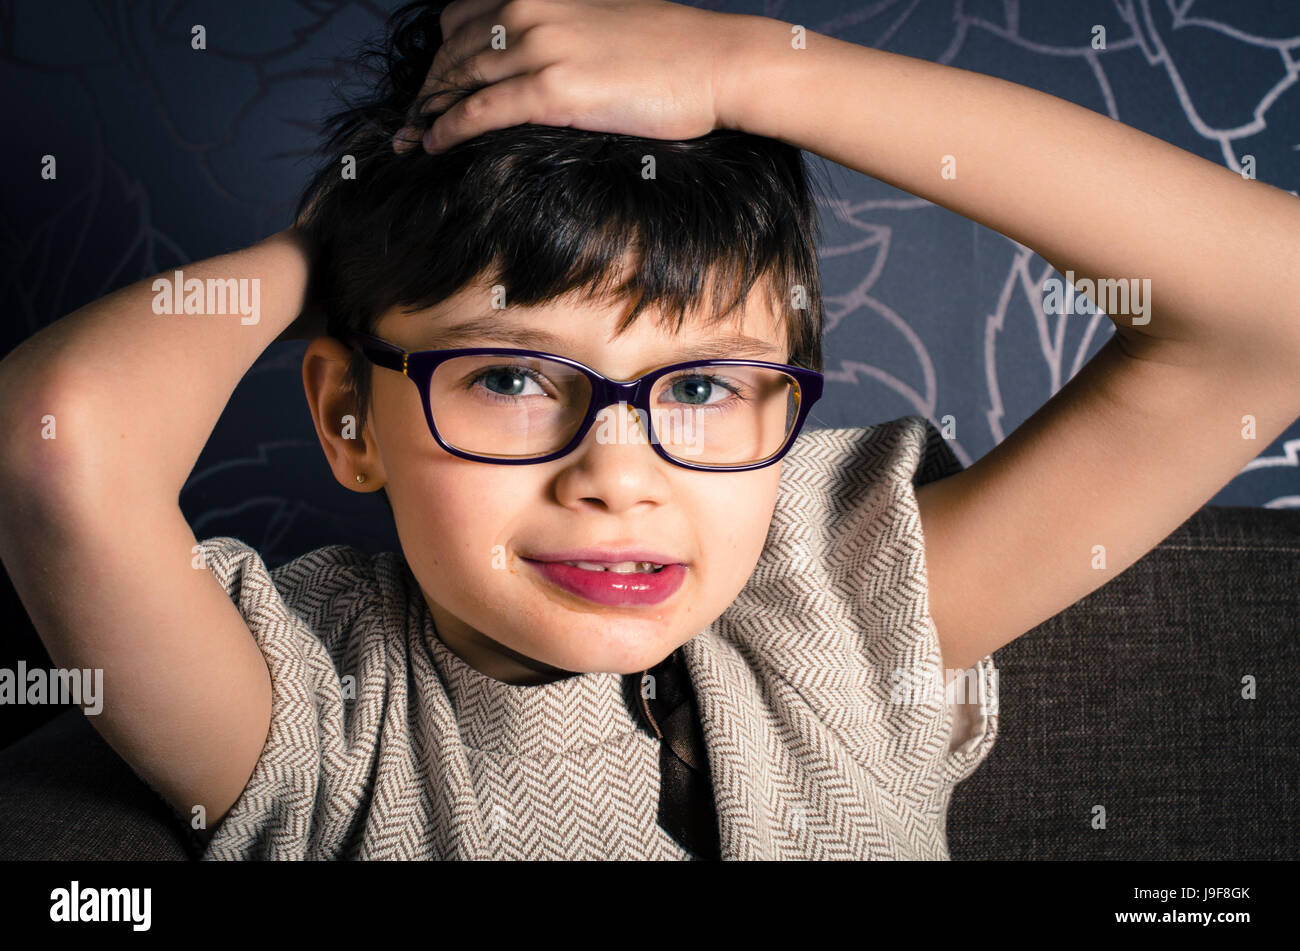 Portrait of beautiful young child with Rett syndrome Stock Photo